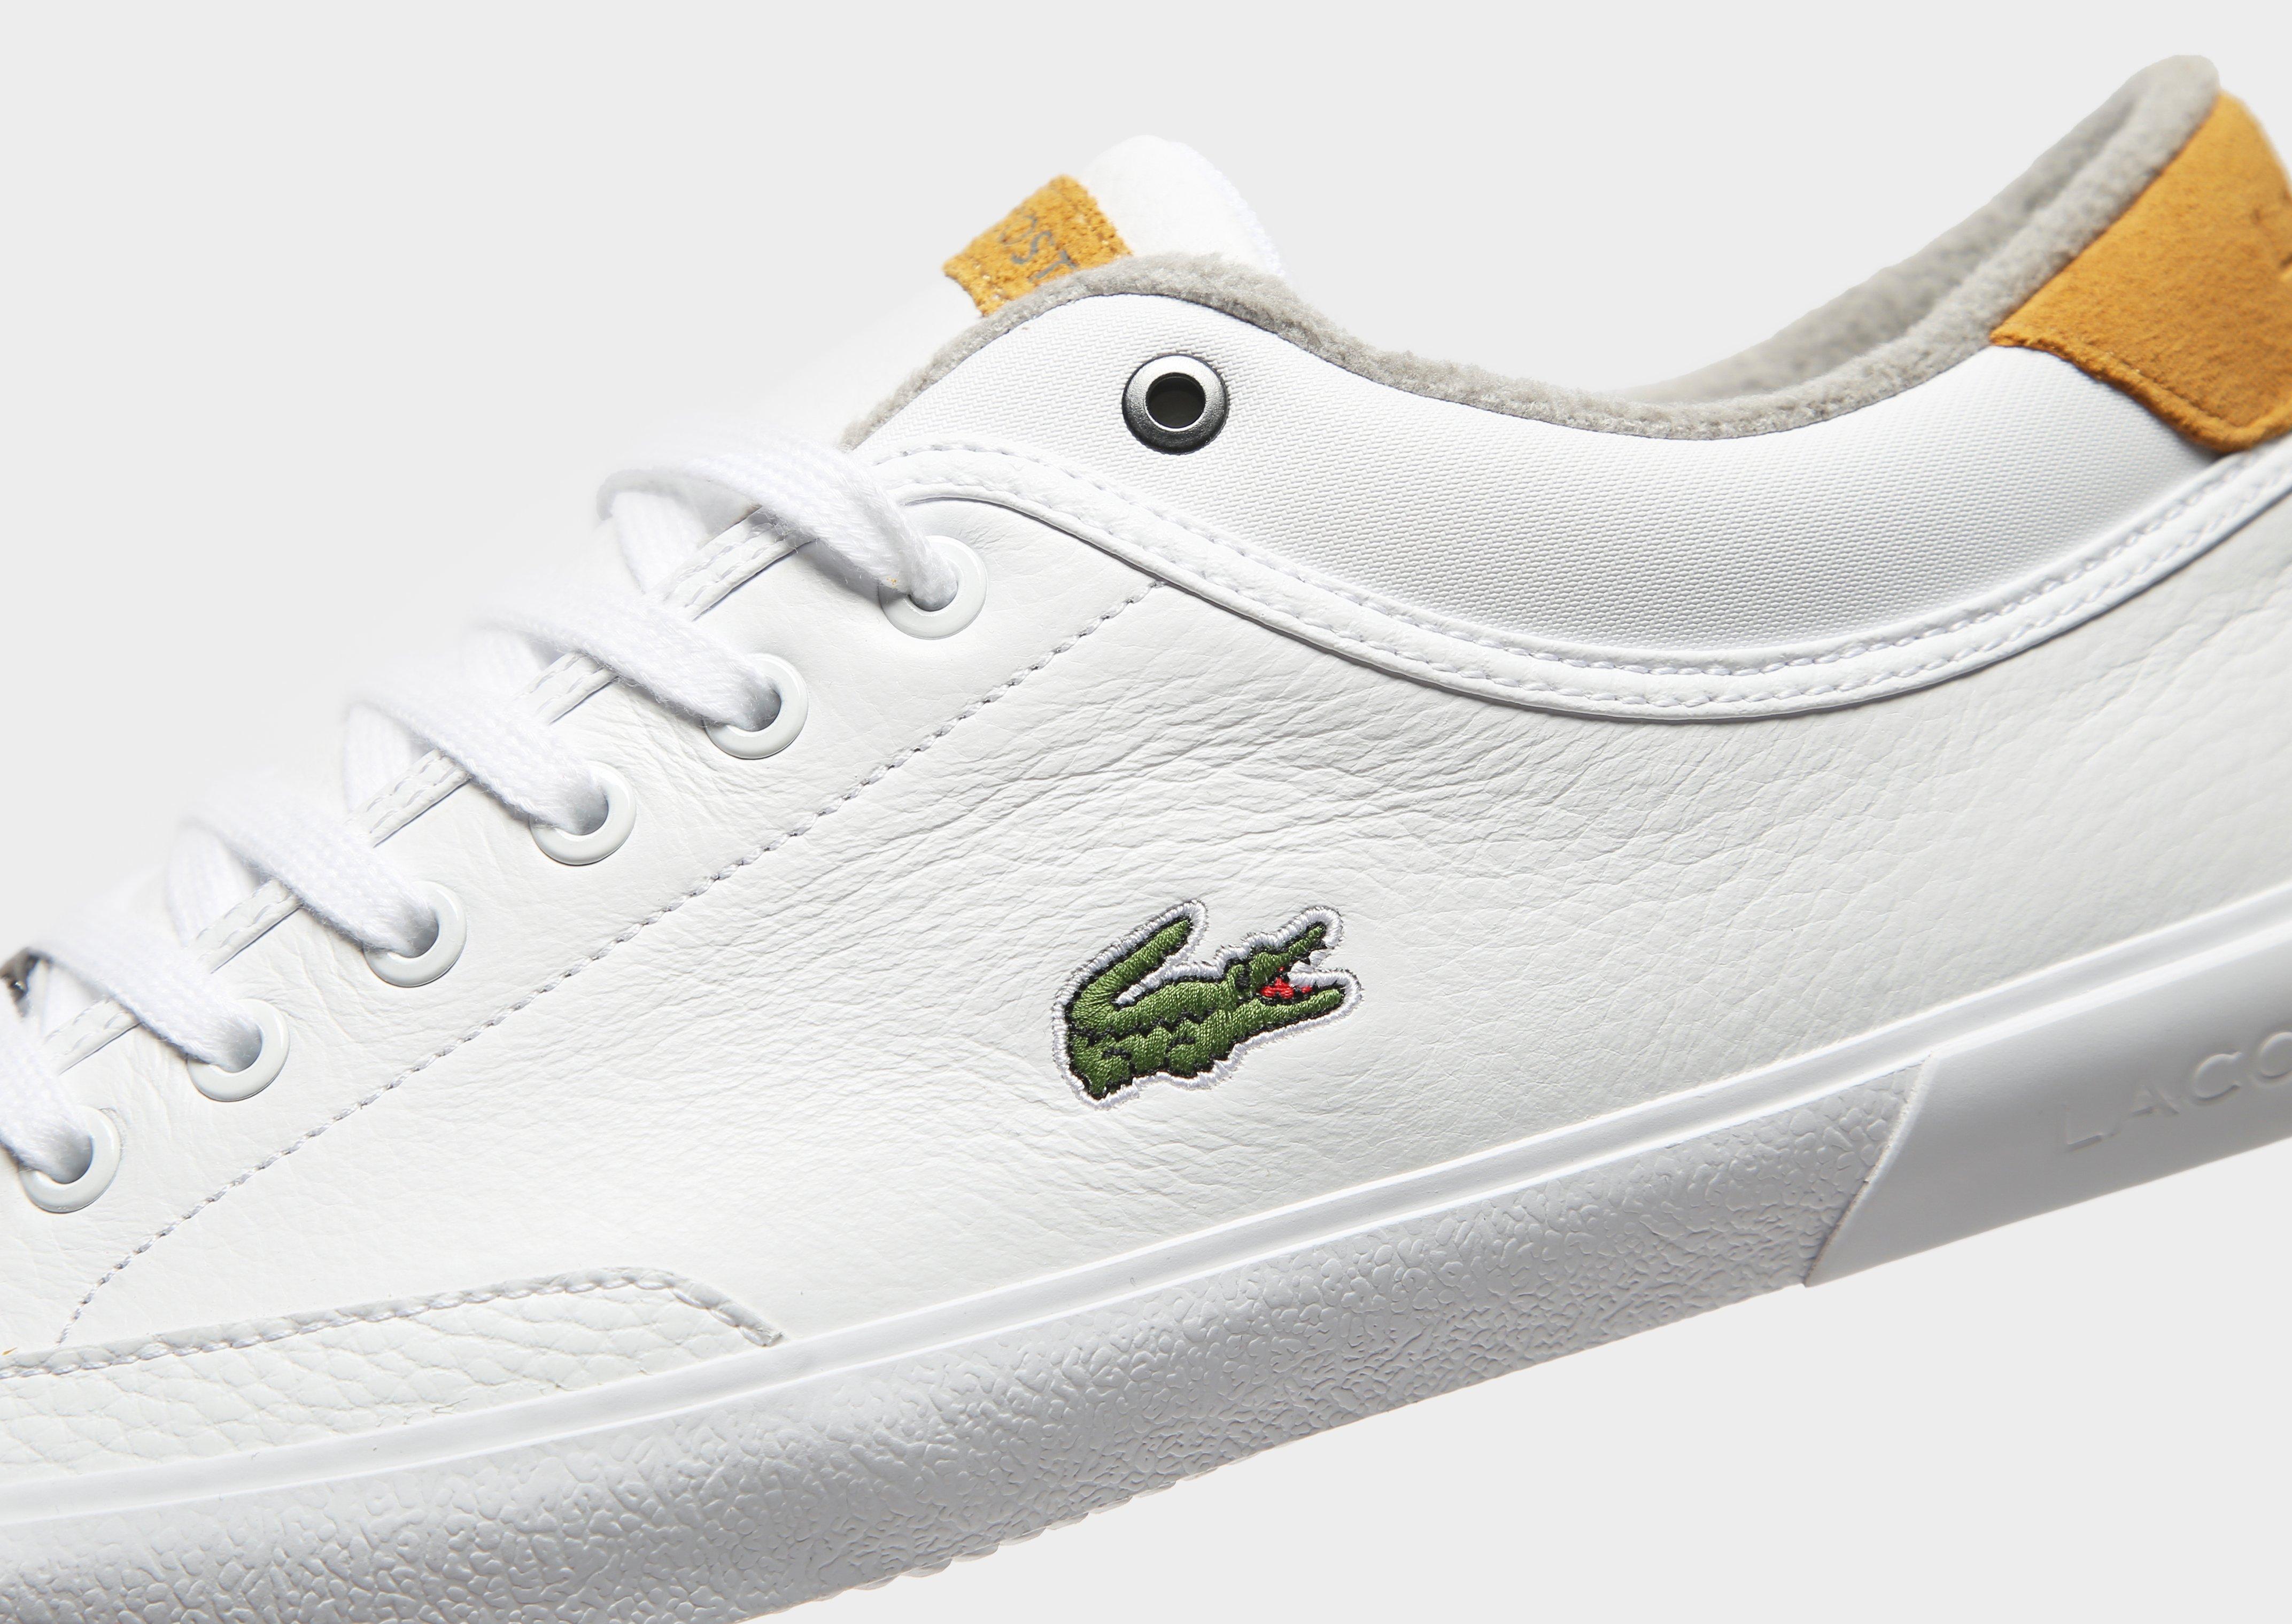 lacoste angha trainers